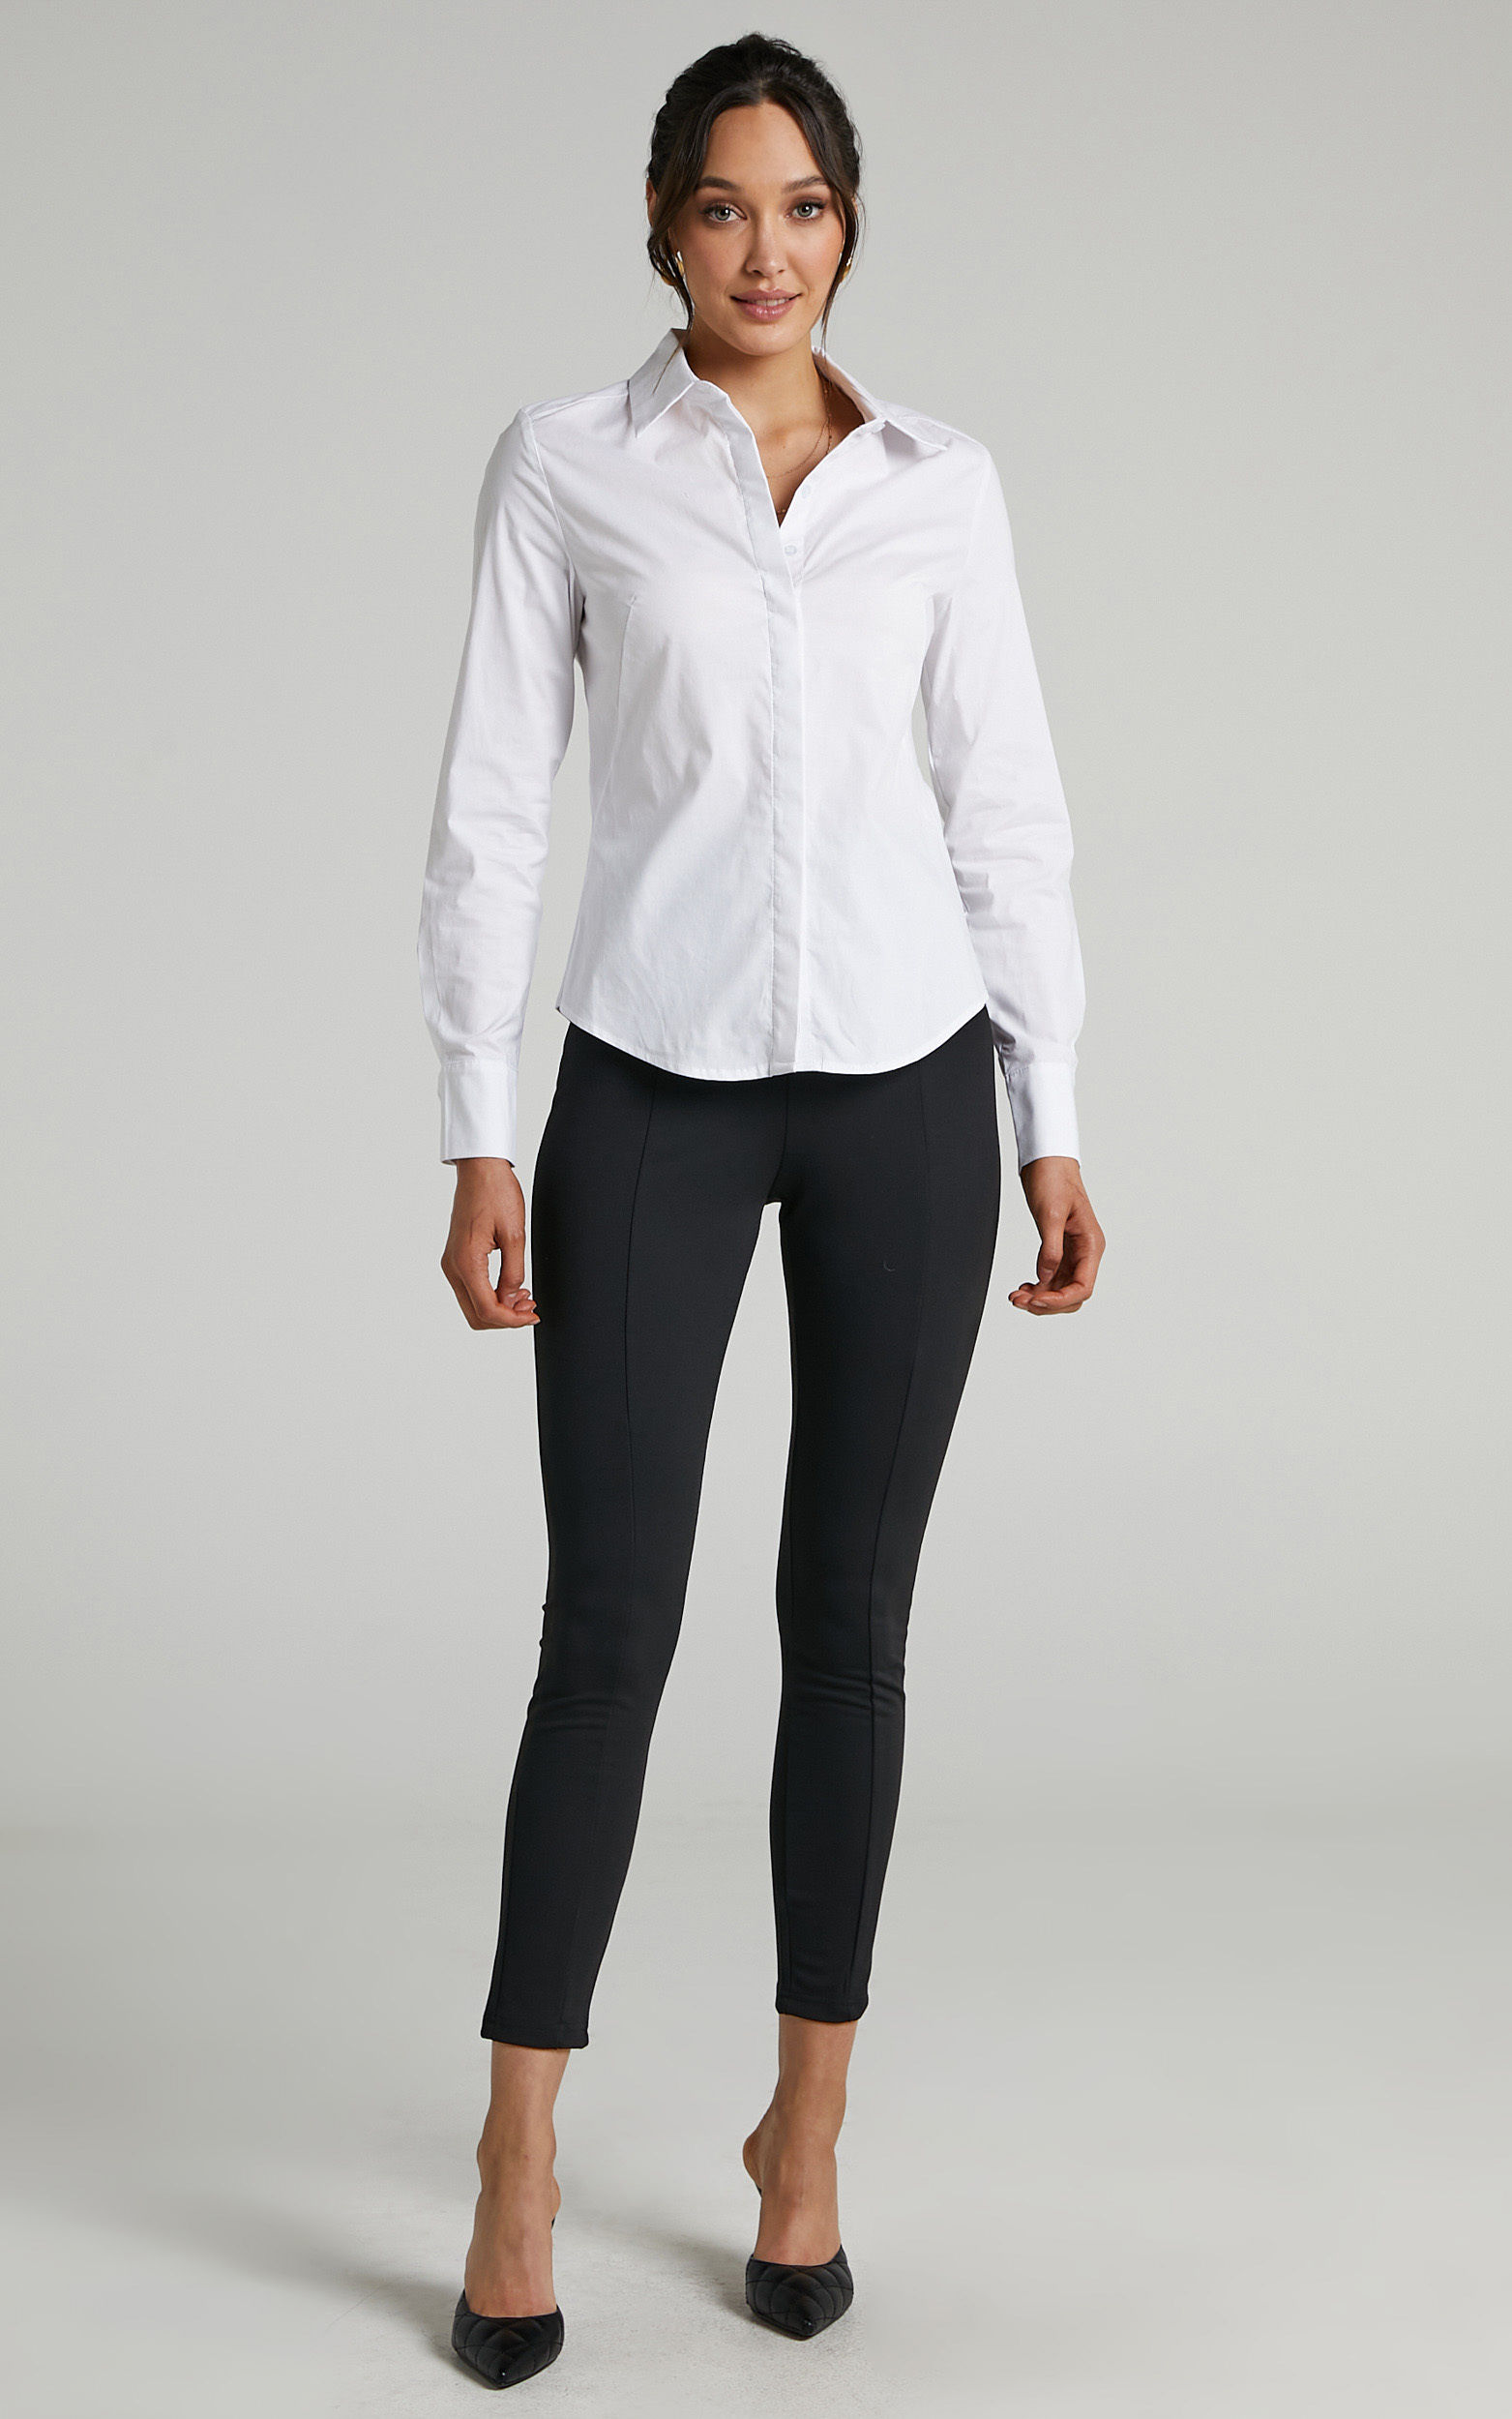 Briannon Longsleeve Fitted Collared Button Up Shirt in White - 06, WHT1, hi-res image number null